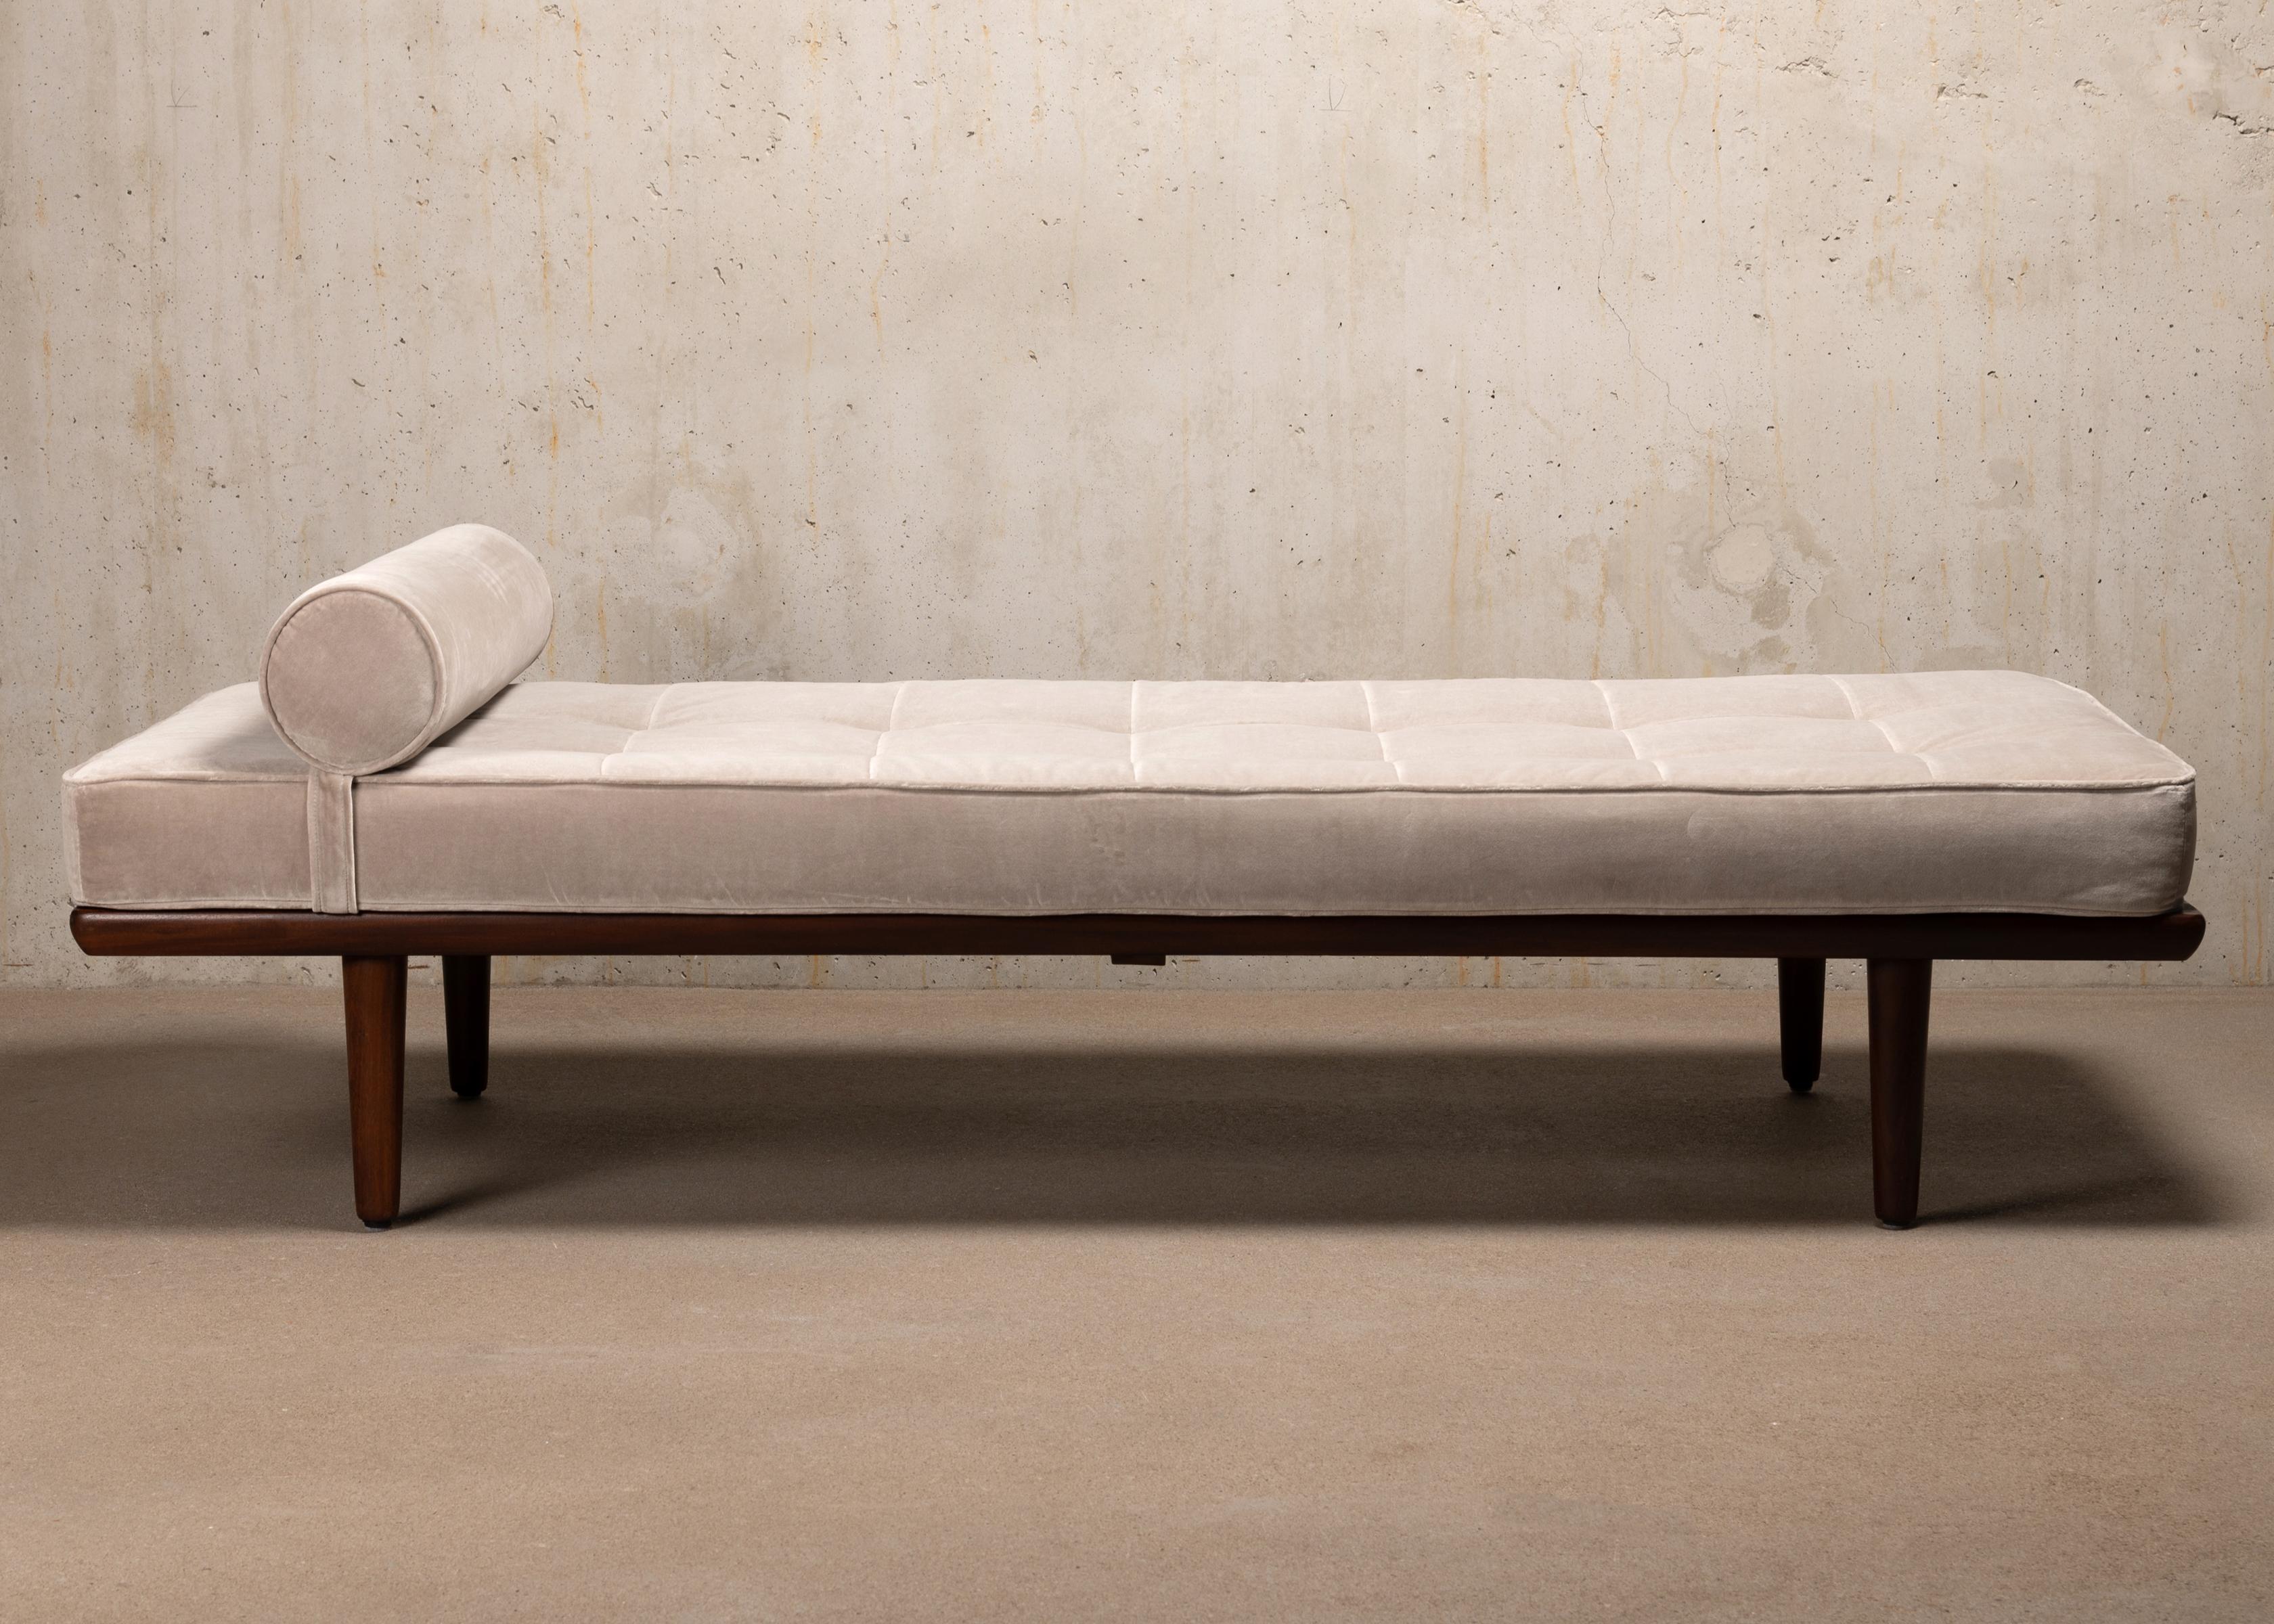 Great daybed Model GE19, designed by Hans Hans J. Wegner for GETAMA Denmark in 1956. Teak frame with tapered legs in good condition with minor traces of use. New mattress and neck roll pillow upholstered in beautiful high quality soft Kvadrat Harald